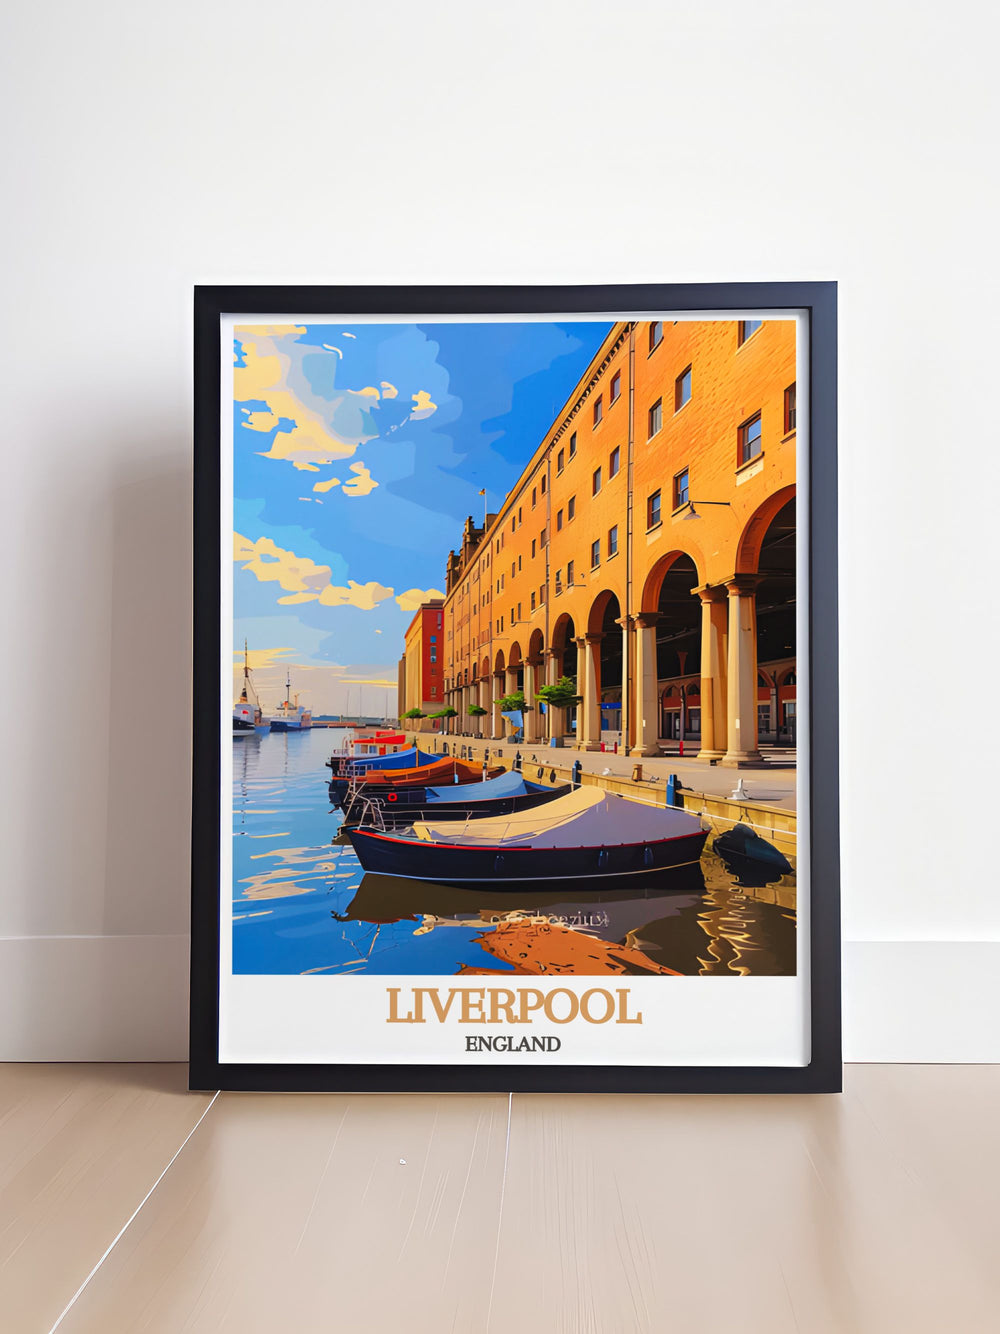 Transform your living space with the Cream Liverpool Poster a framed print capturing the spirit of Liverpools dynamic nightlife and electronic music scene ideal for modern interiors and Royal Albert Dock elegant home decor